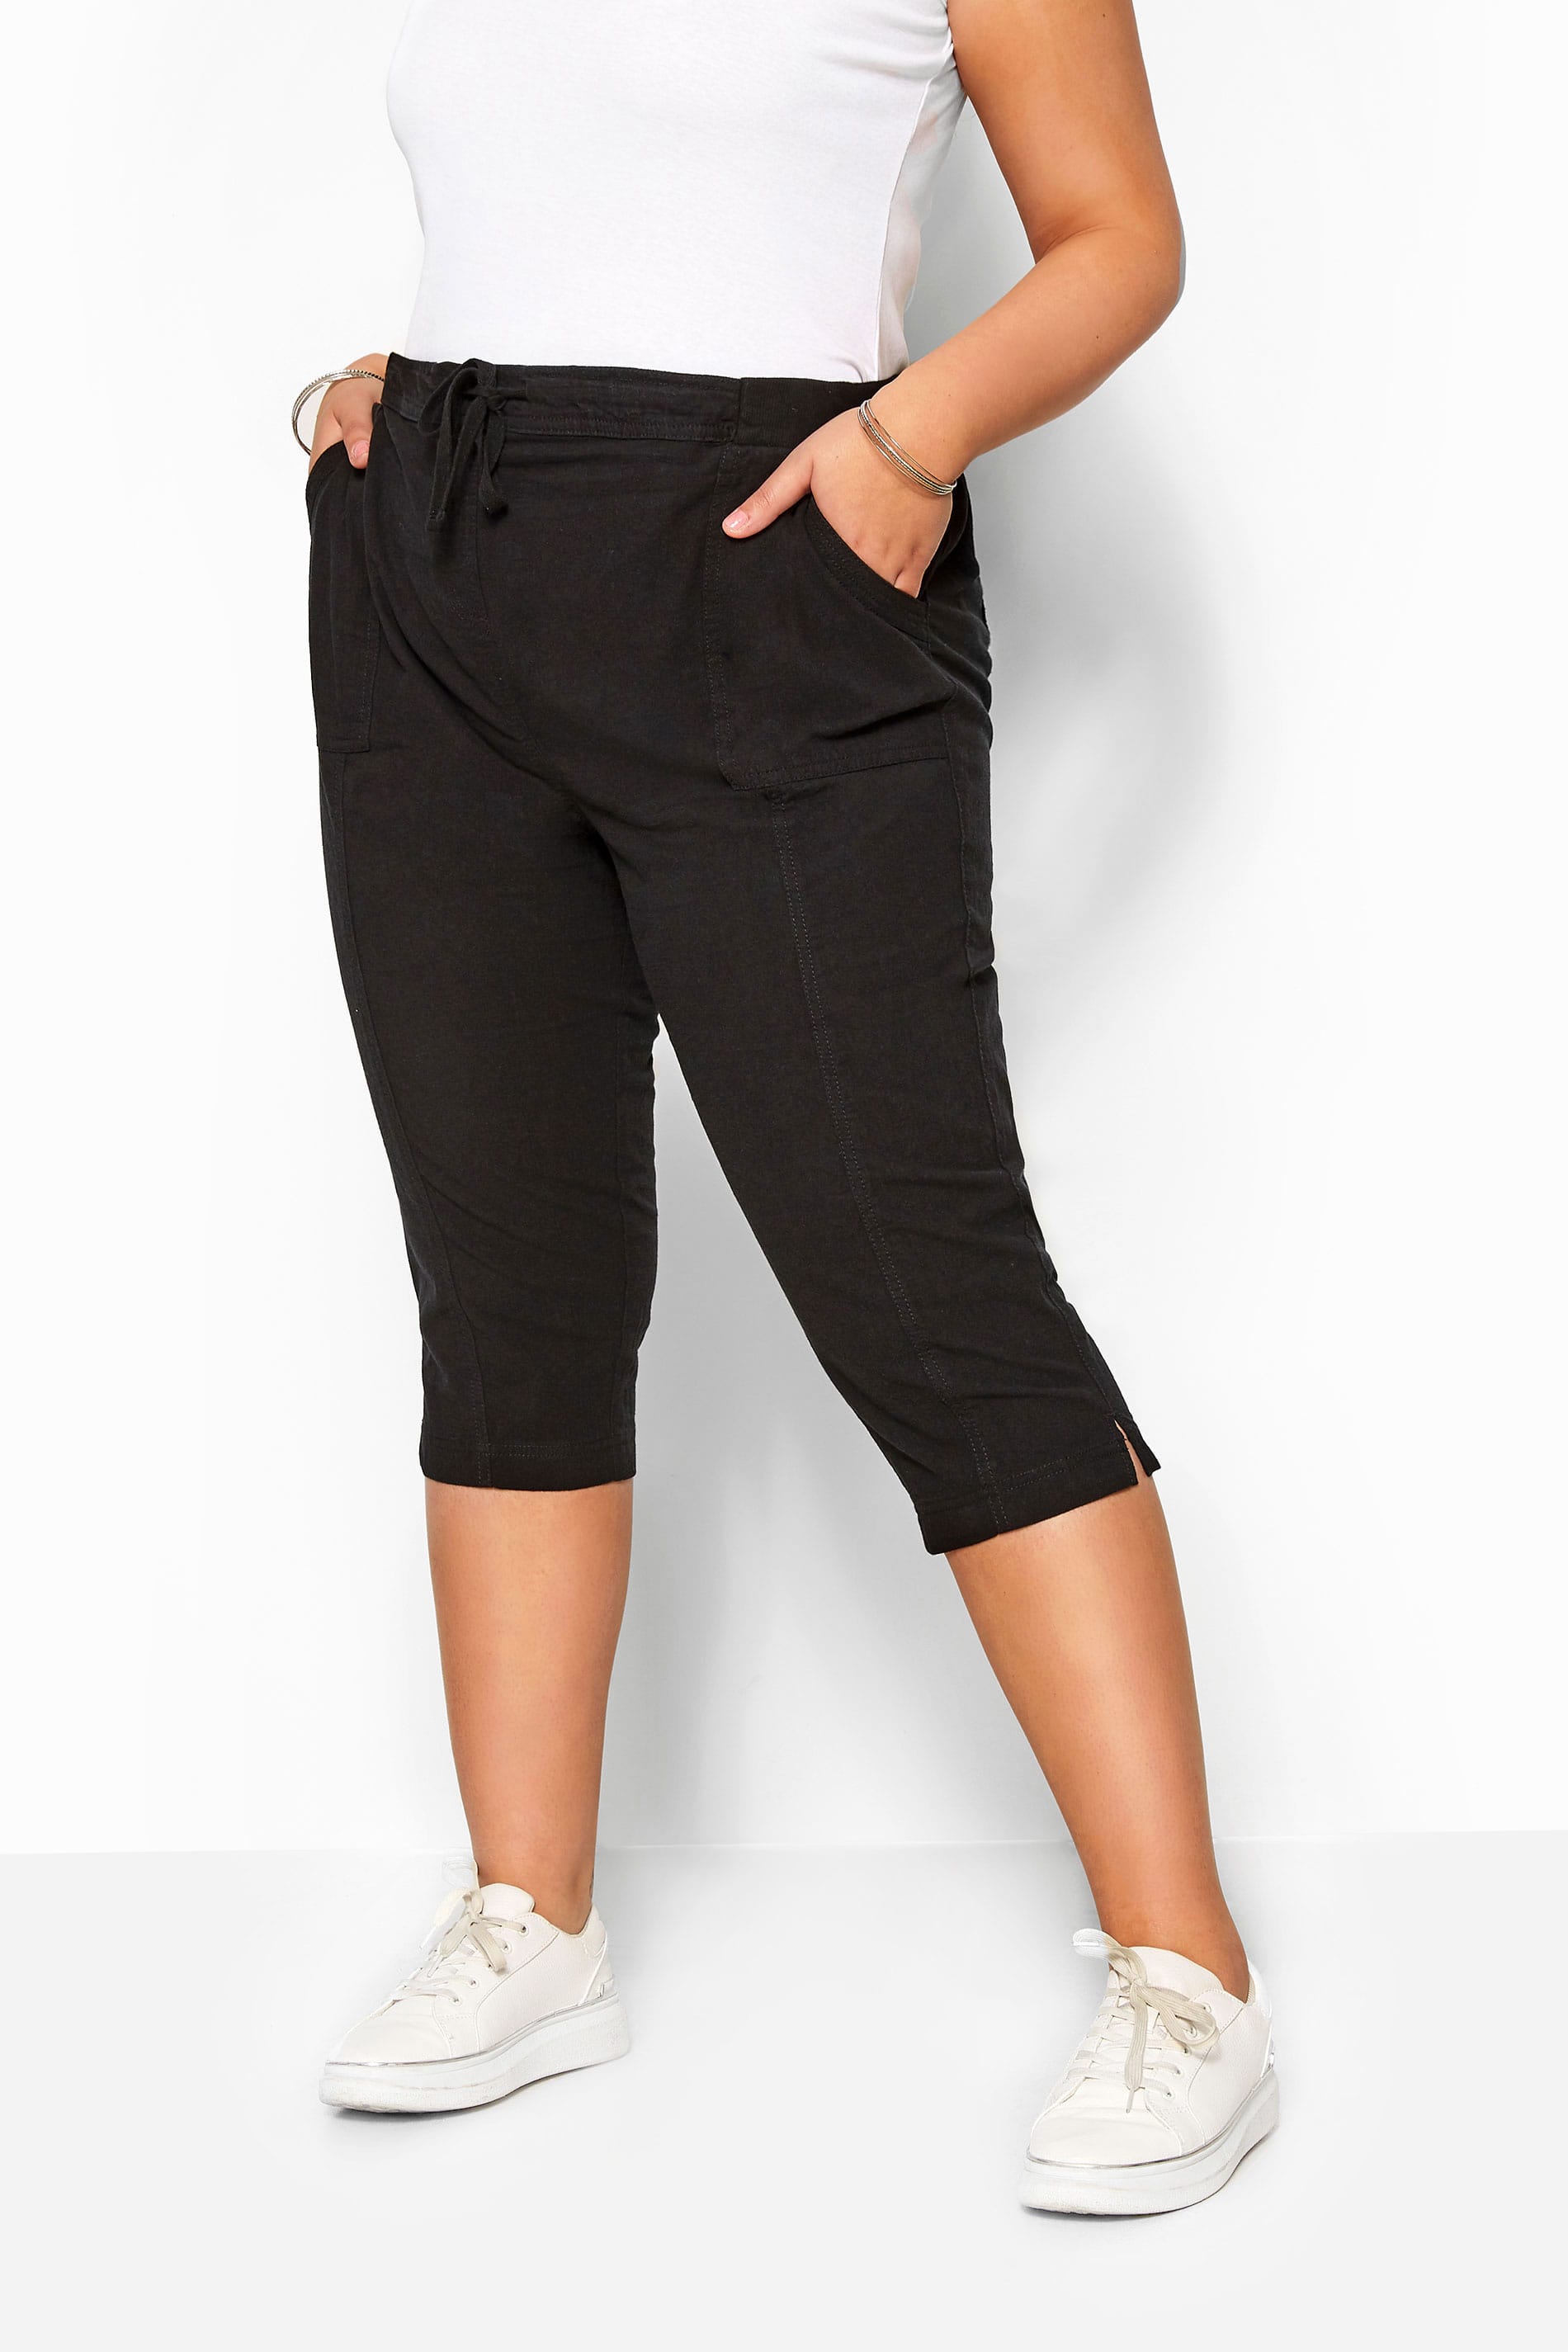 Black Cool Cotton Cropped Trousers | Plus Sizes 16 to 36 | Yours Clothing